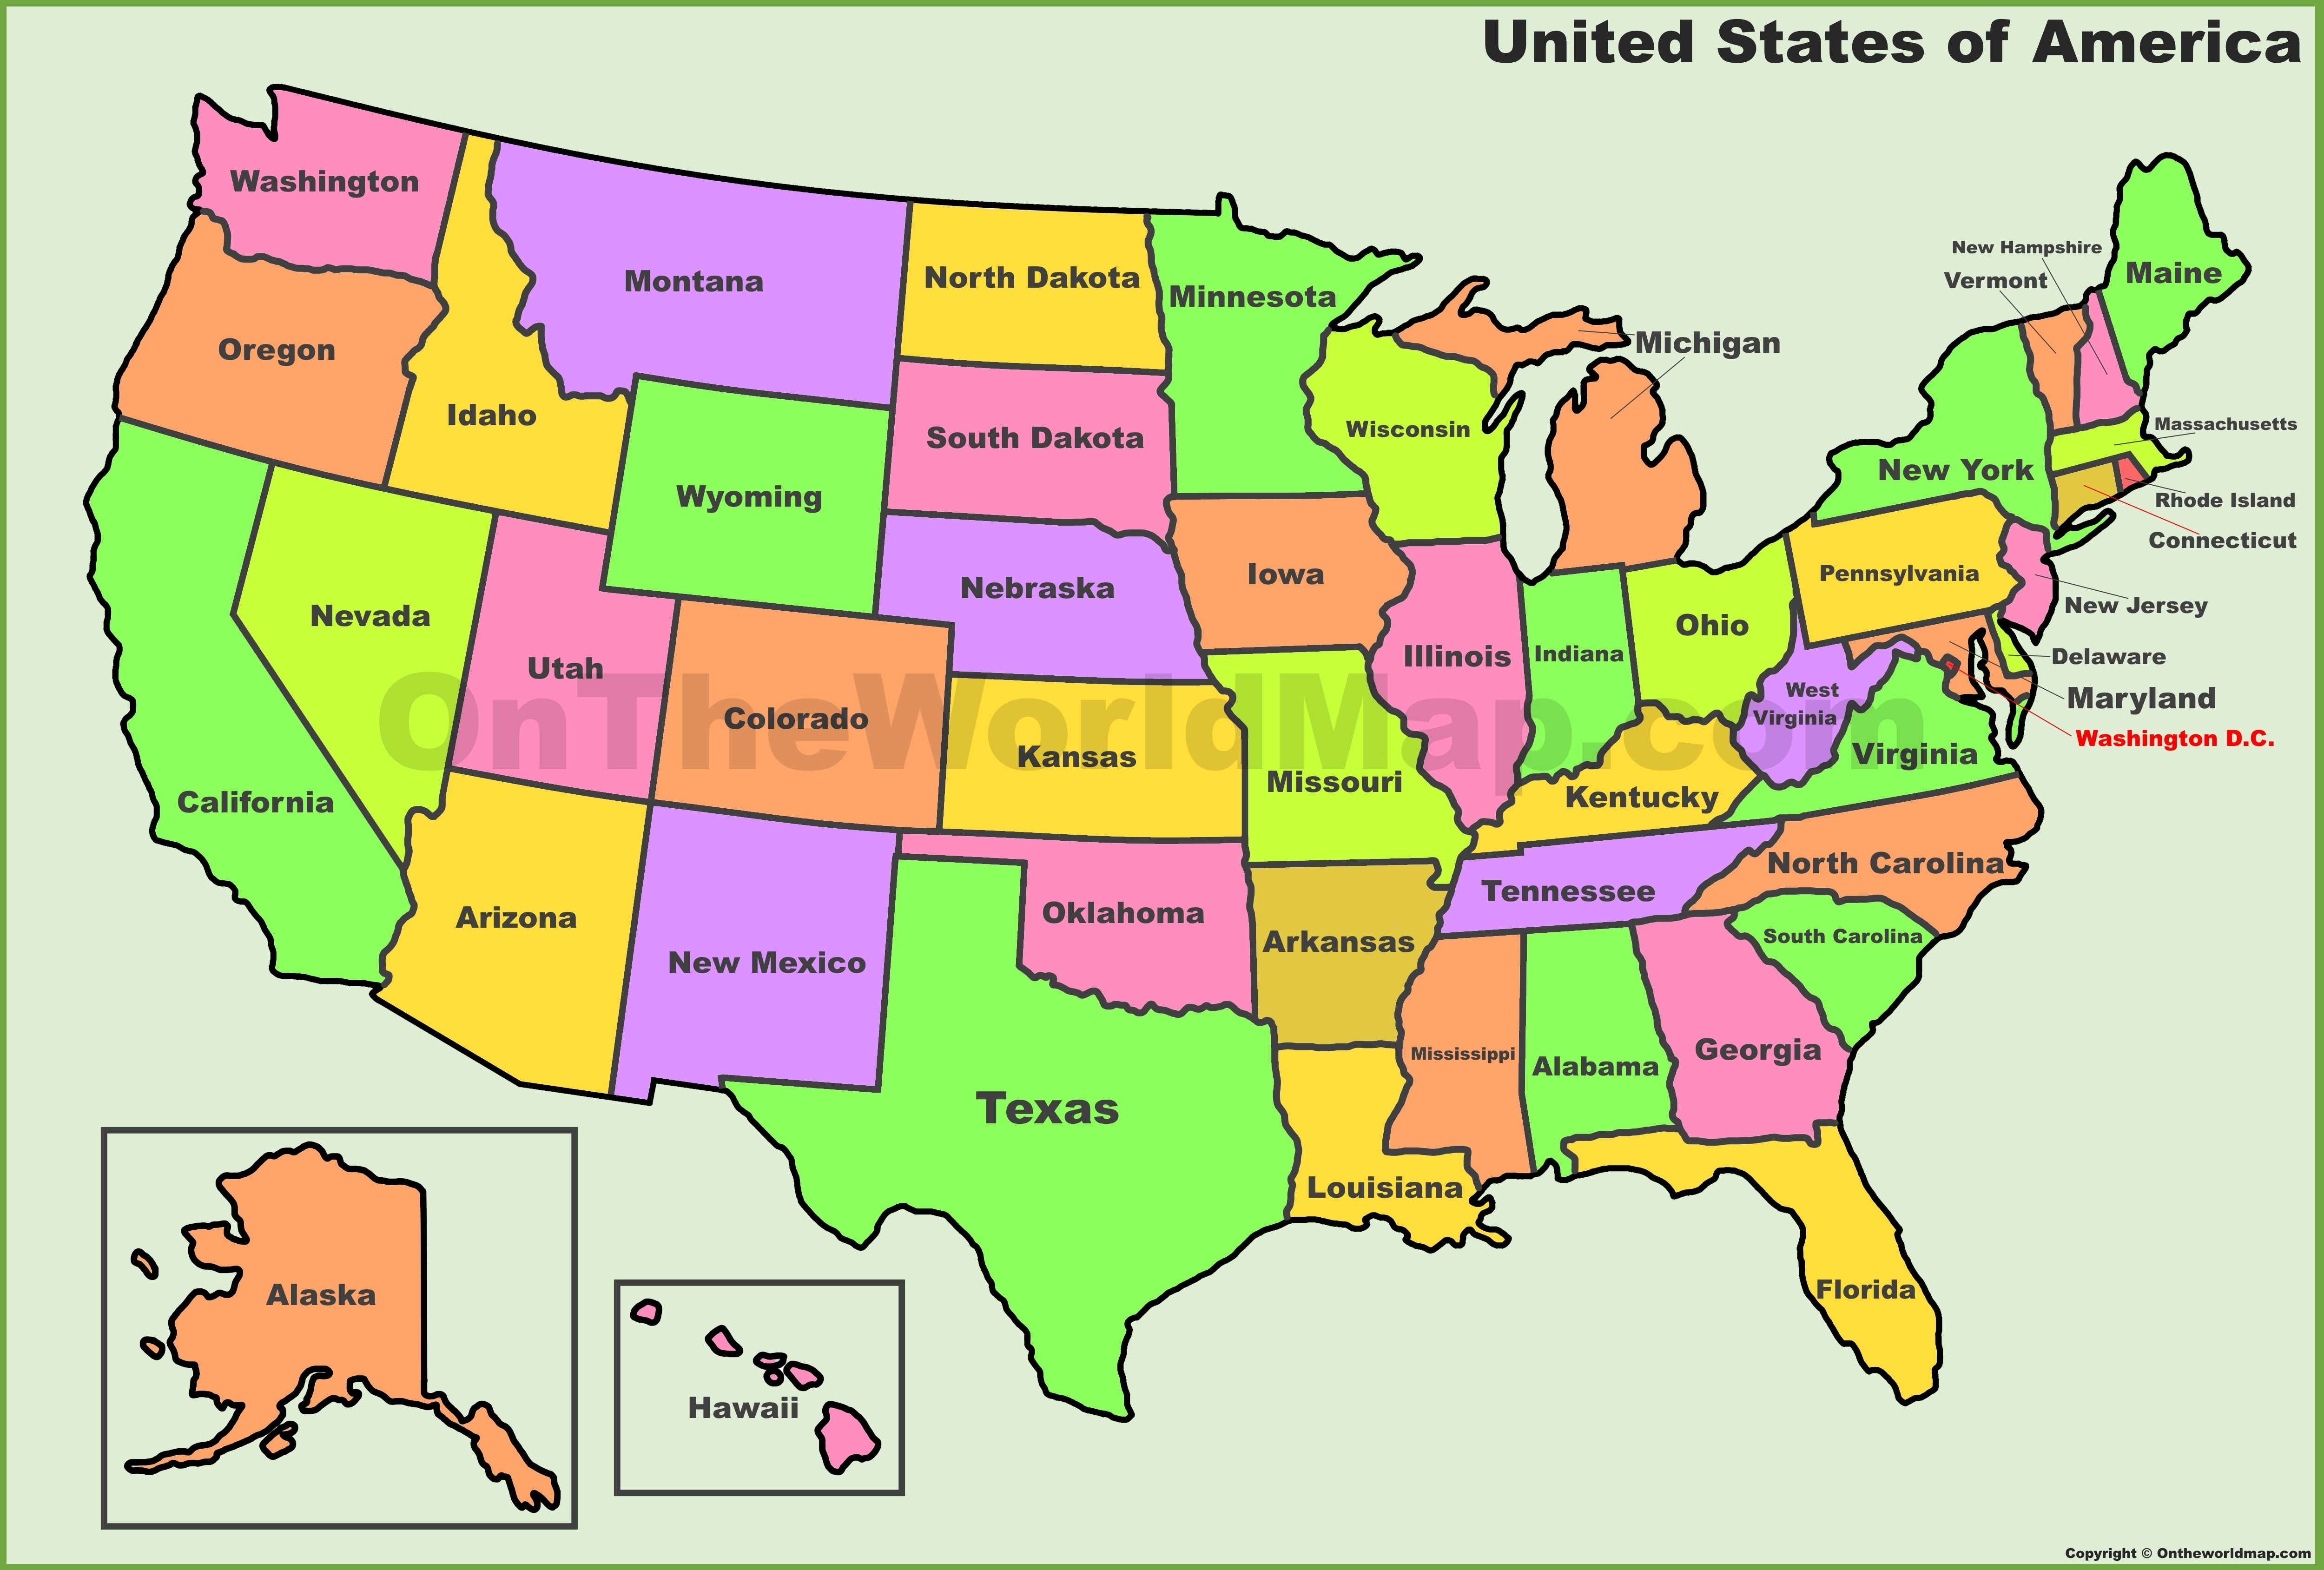 State Abbreviations For The United States Of America